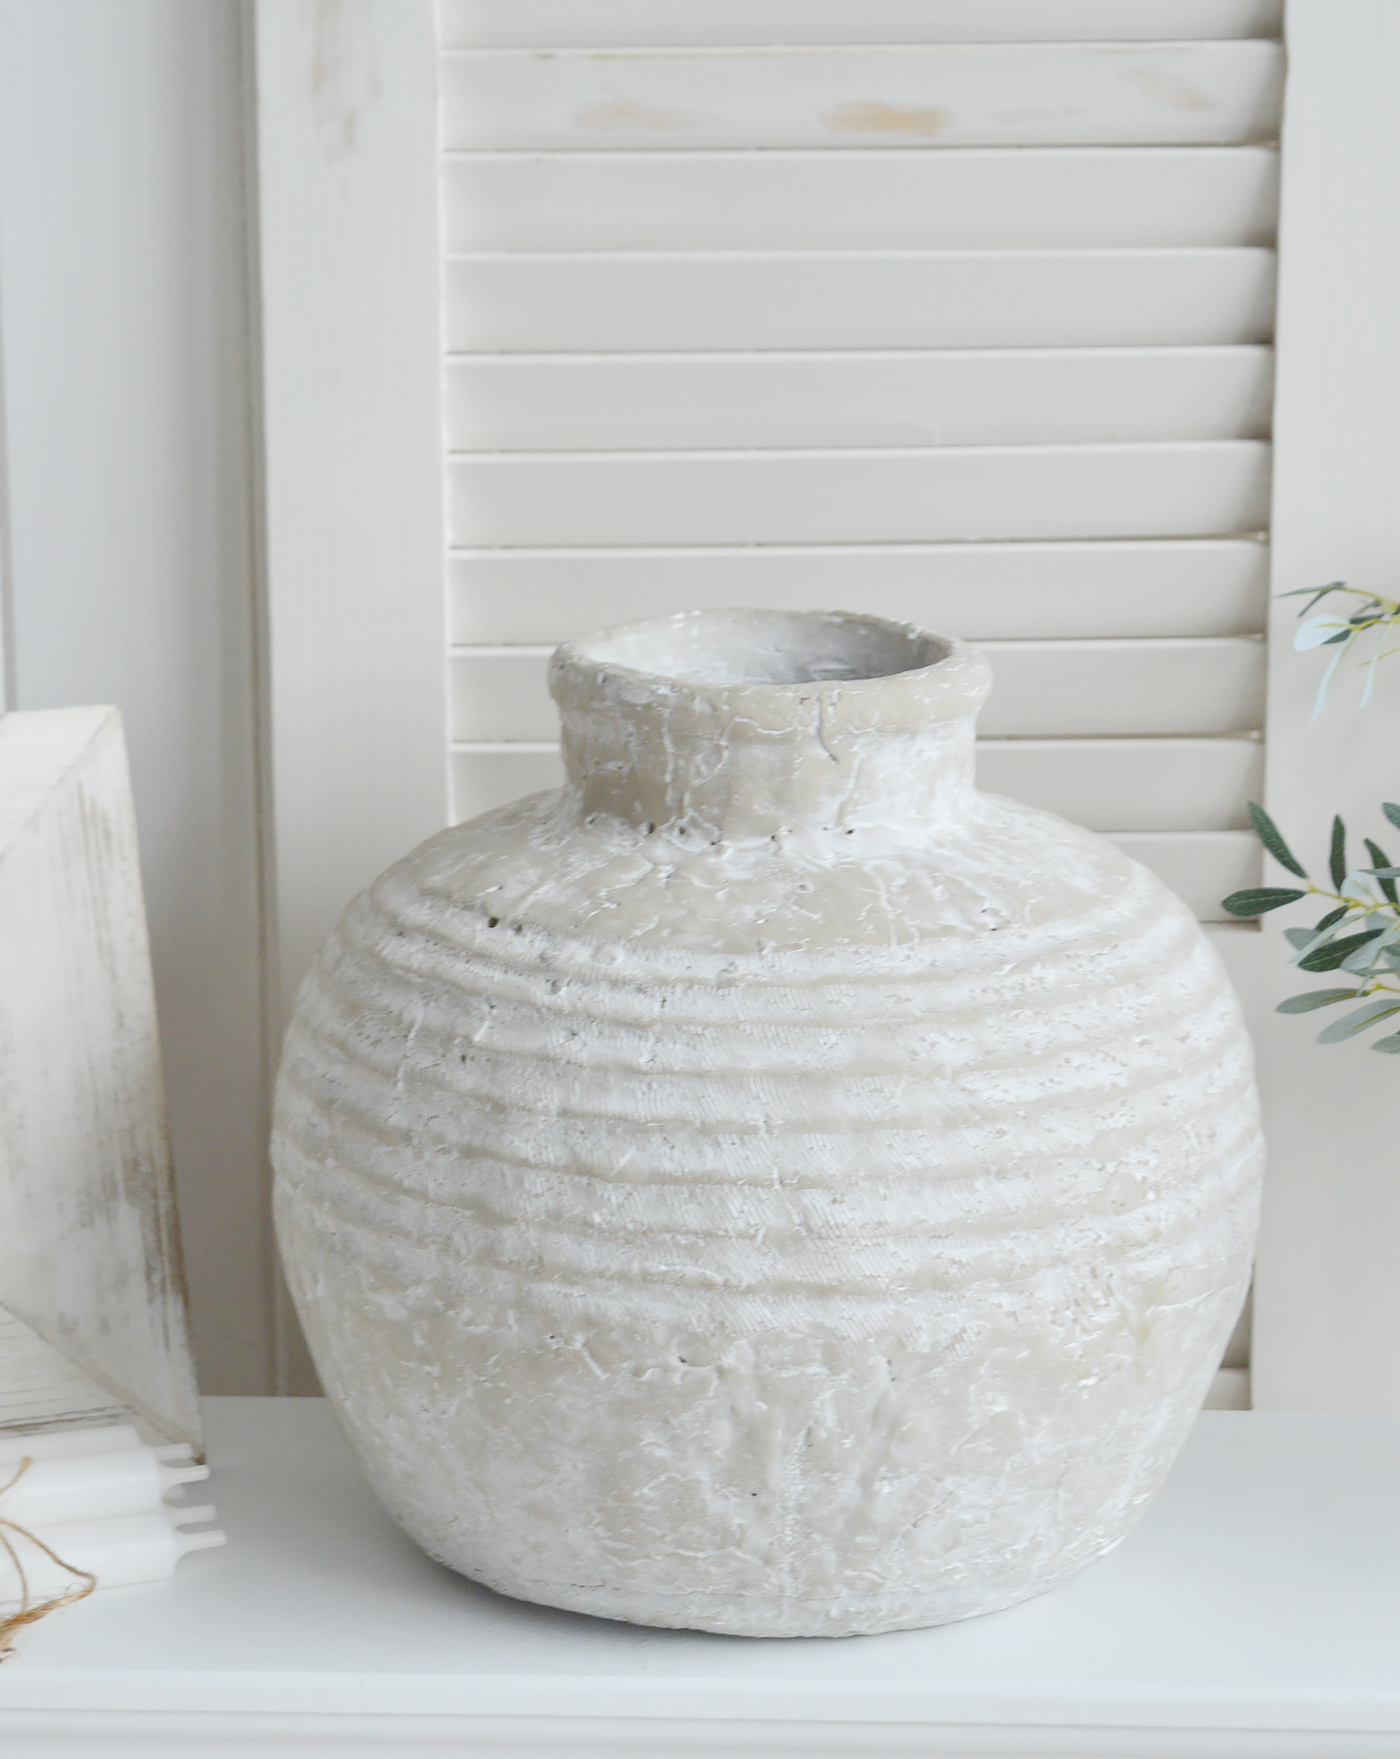 Newfane large stone vase, ideal for styling in a New England styled homes for coastal, country and modern farmhouse interiors, complementing the furniture